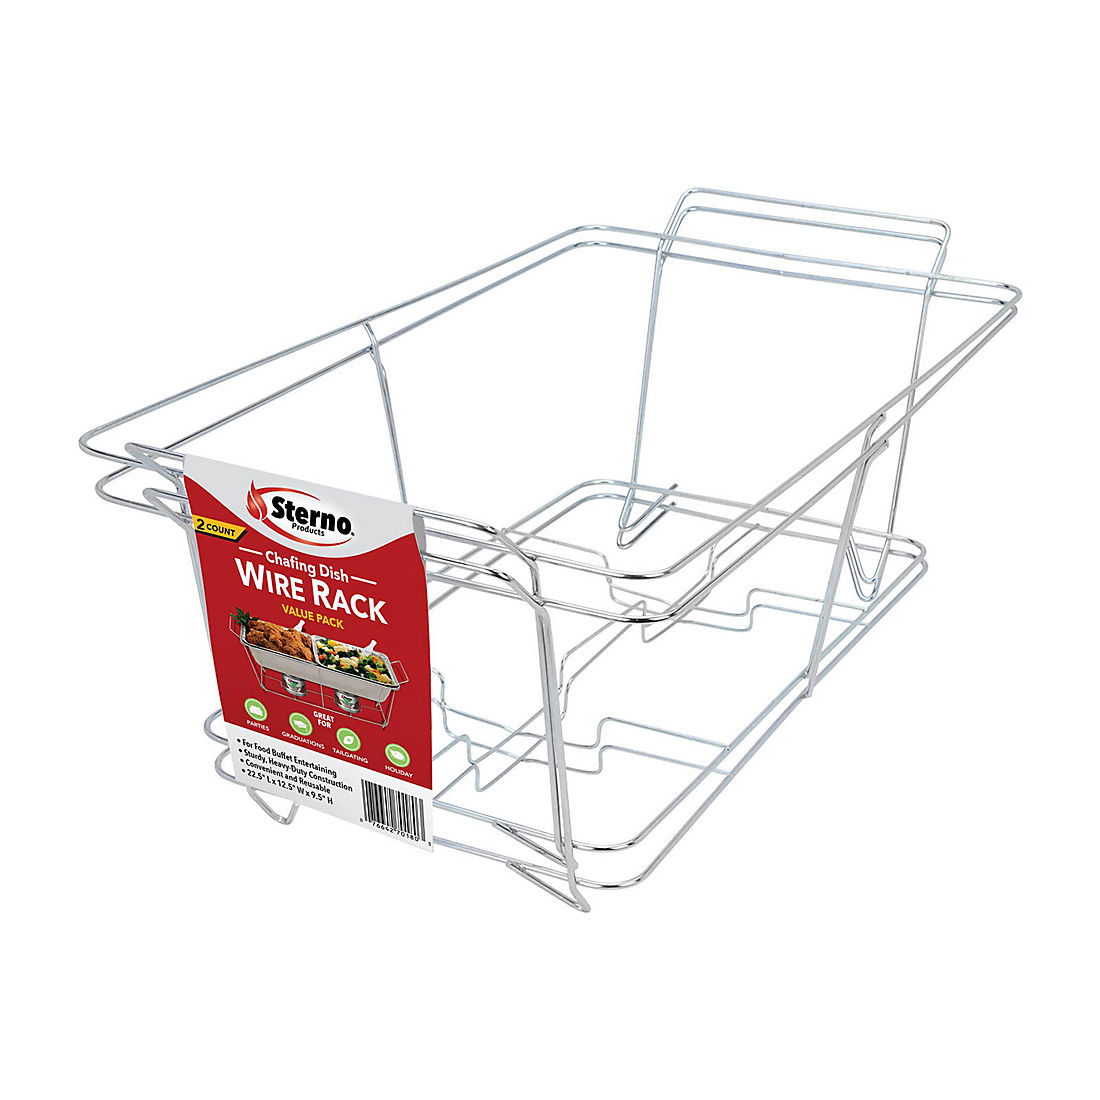 Sterno Chafing Dish Wire Rack